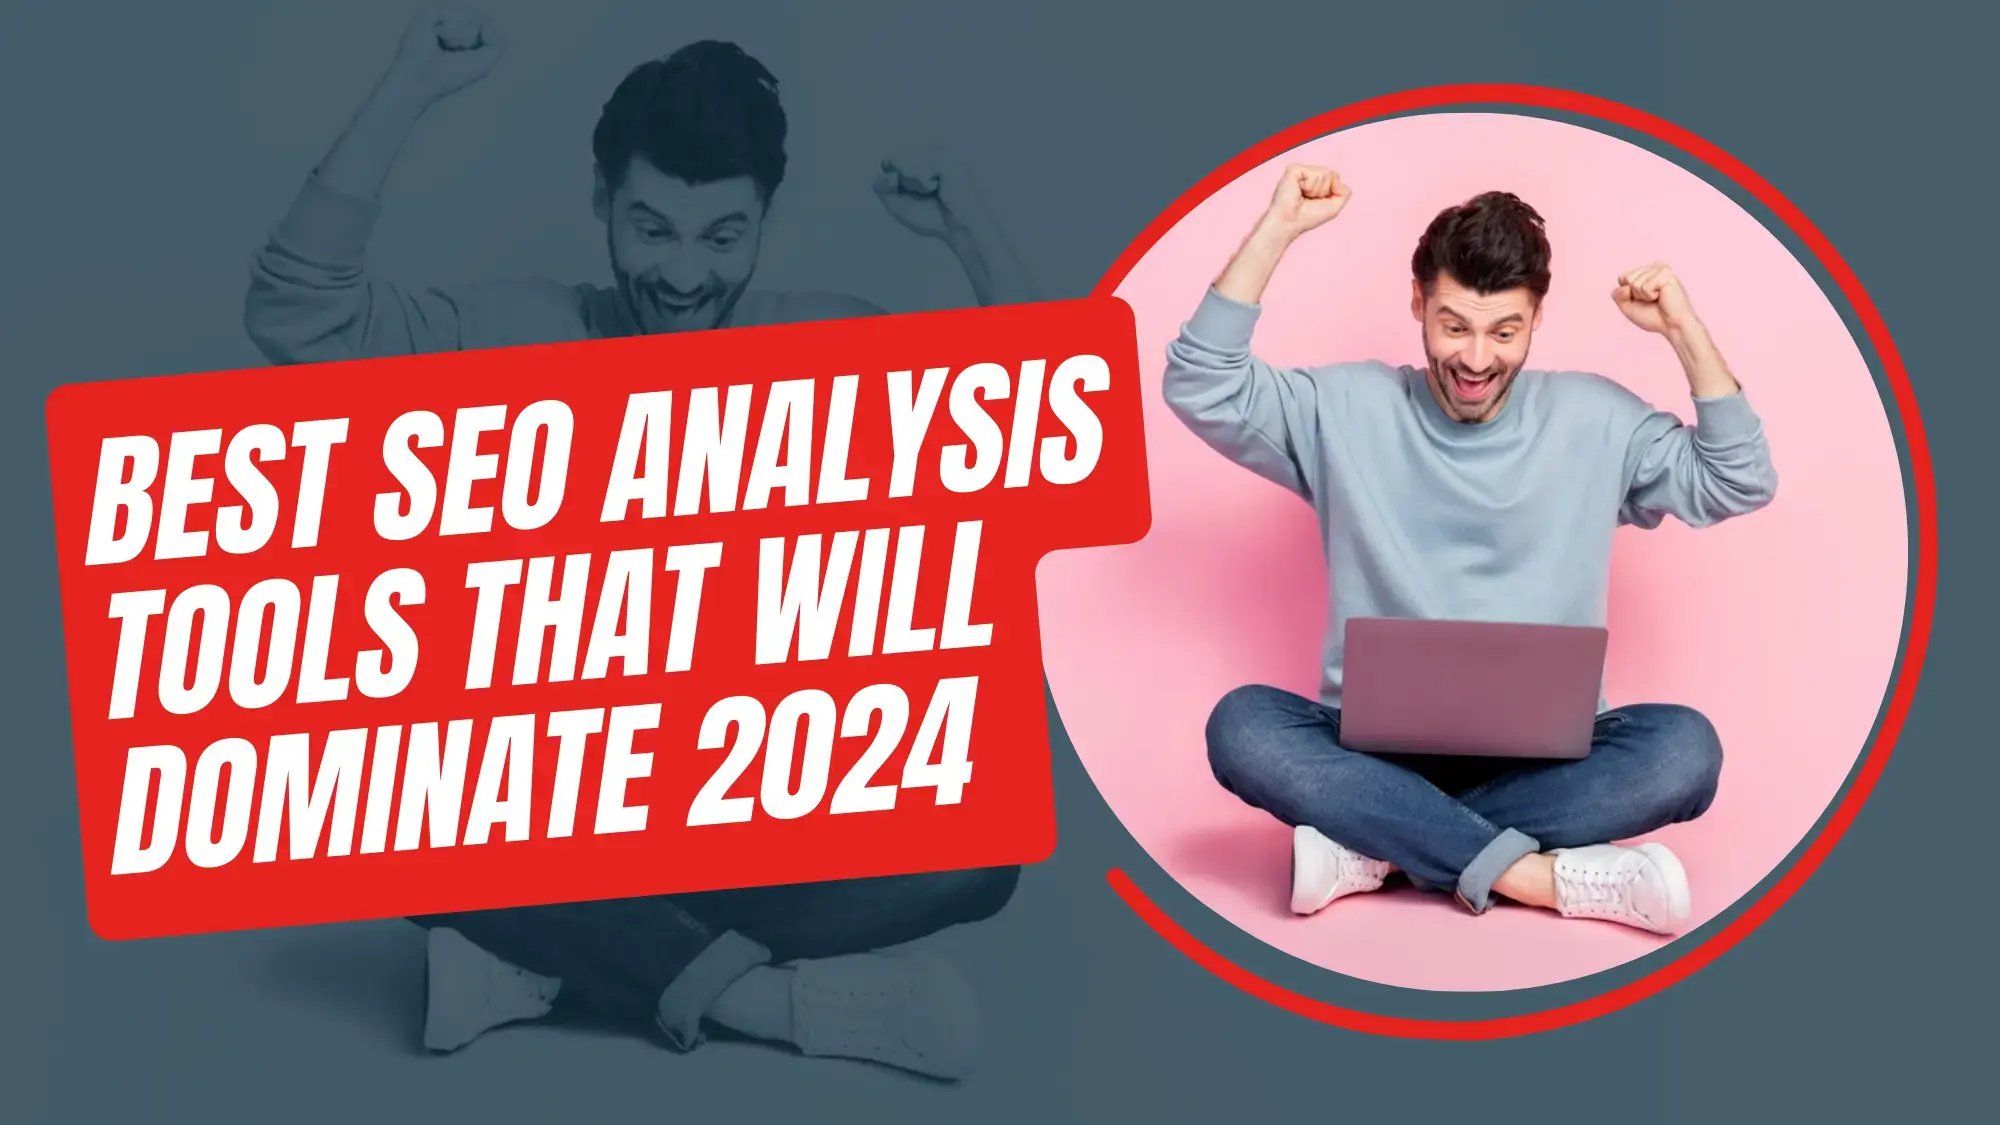 Best SEO analysis tools that will dominate 2024